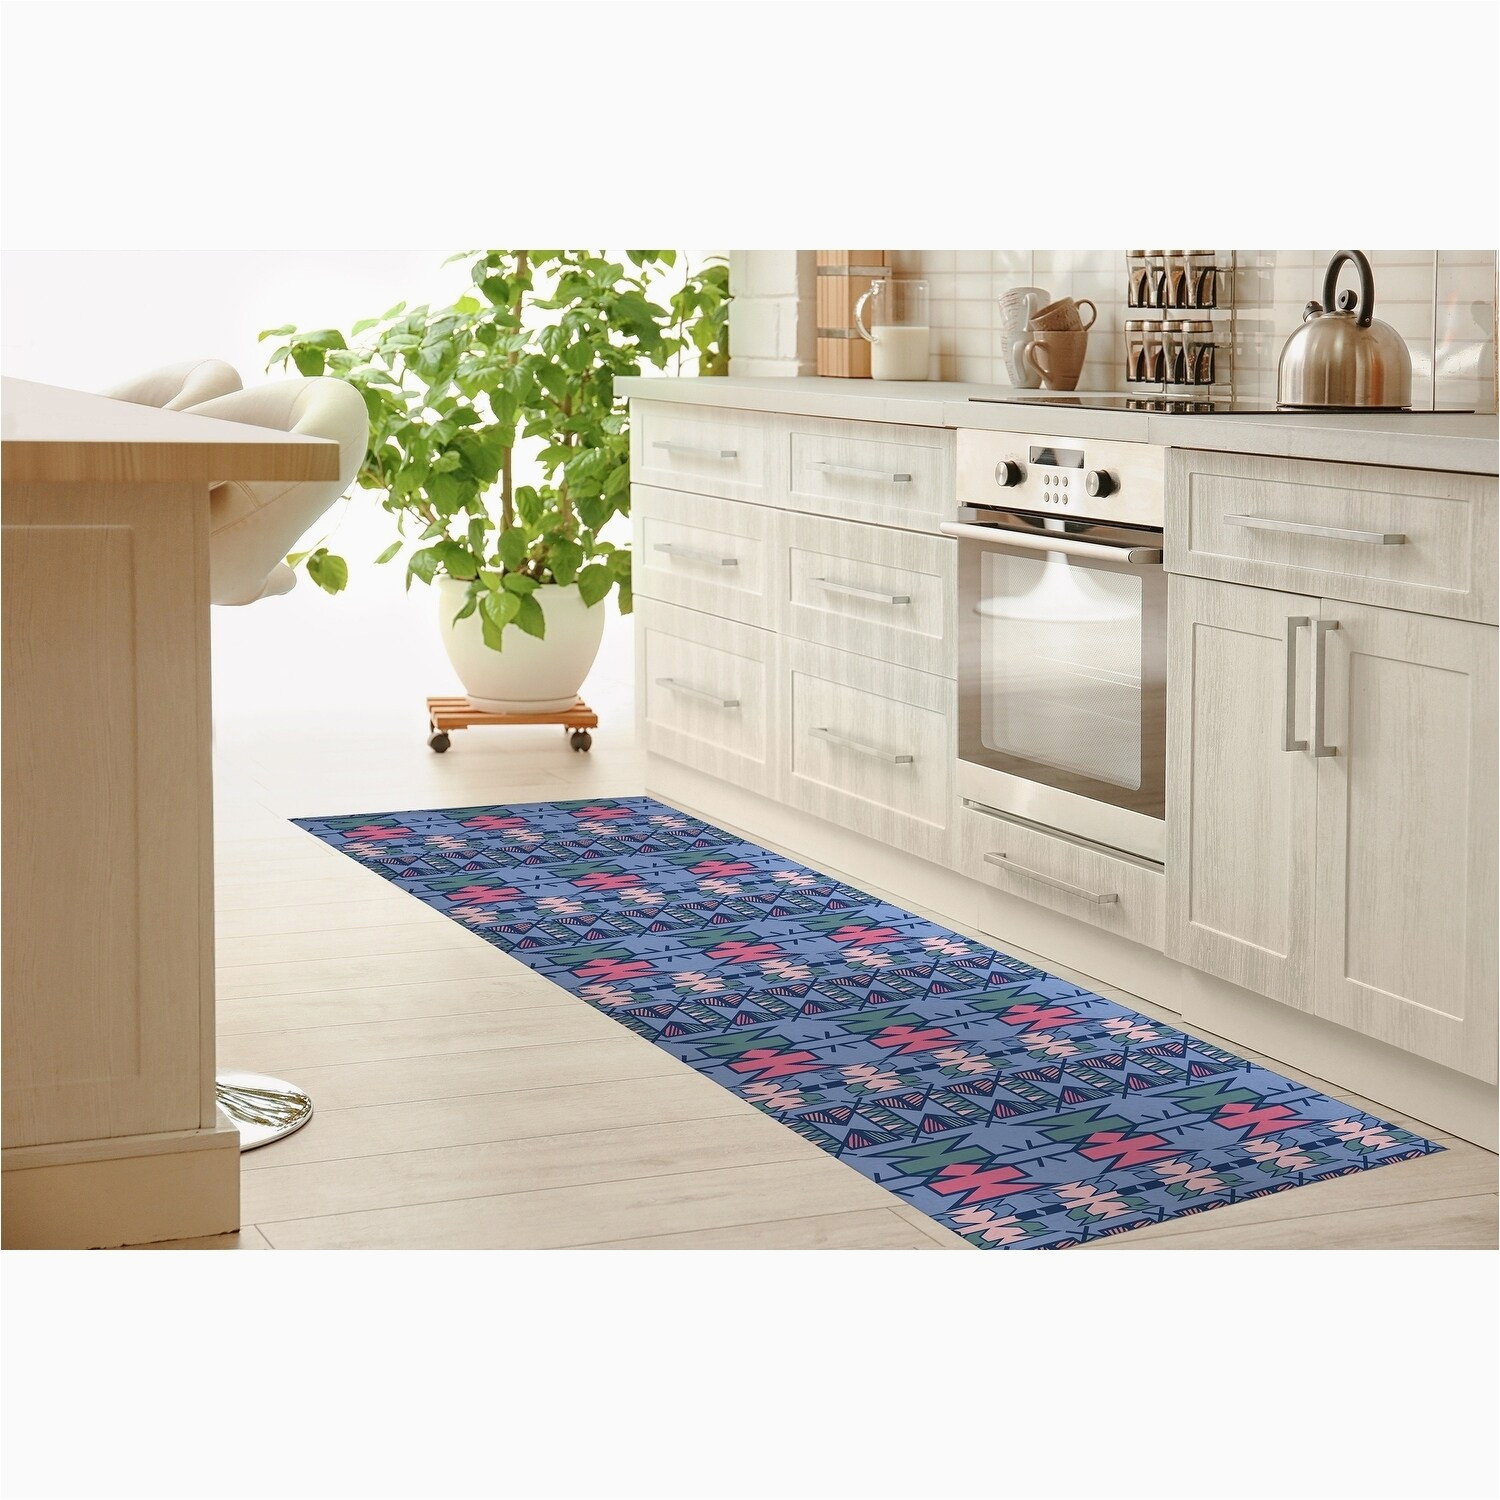 Blue Kitchen Rug Set Kavka Designs Bohemian & Eclectic Indoor Polyester Kitchen Rugs …